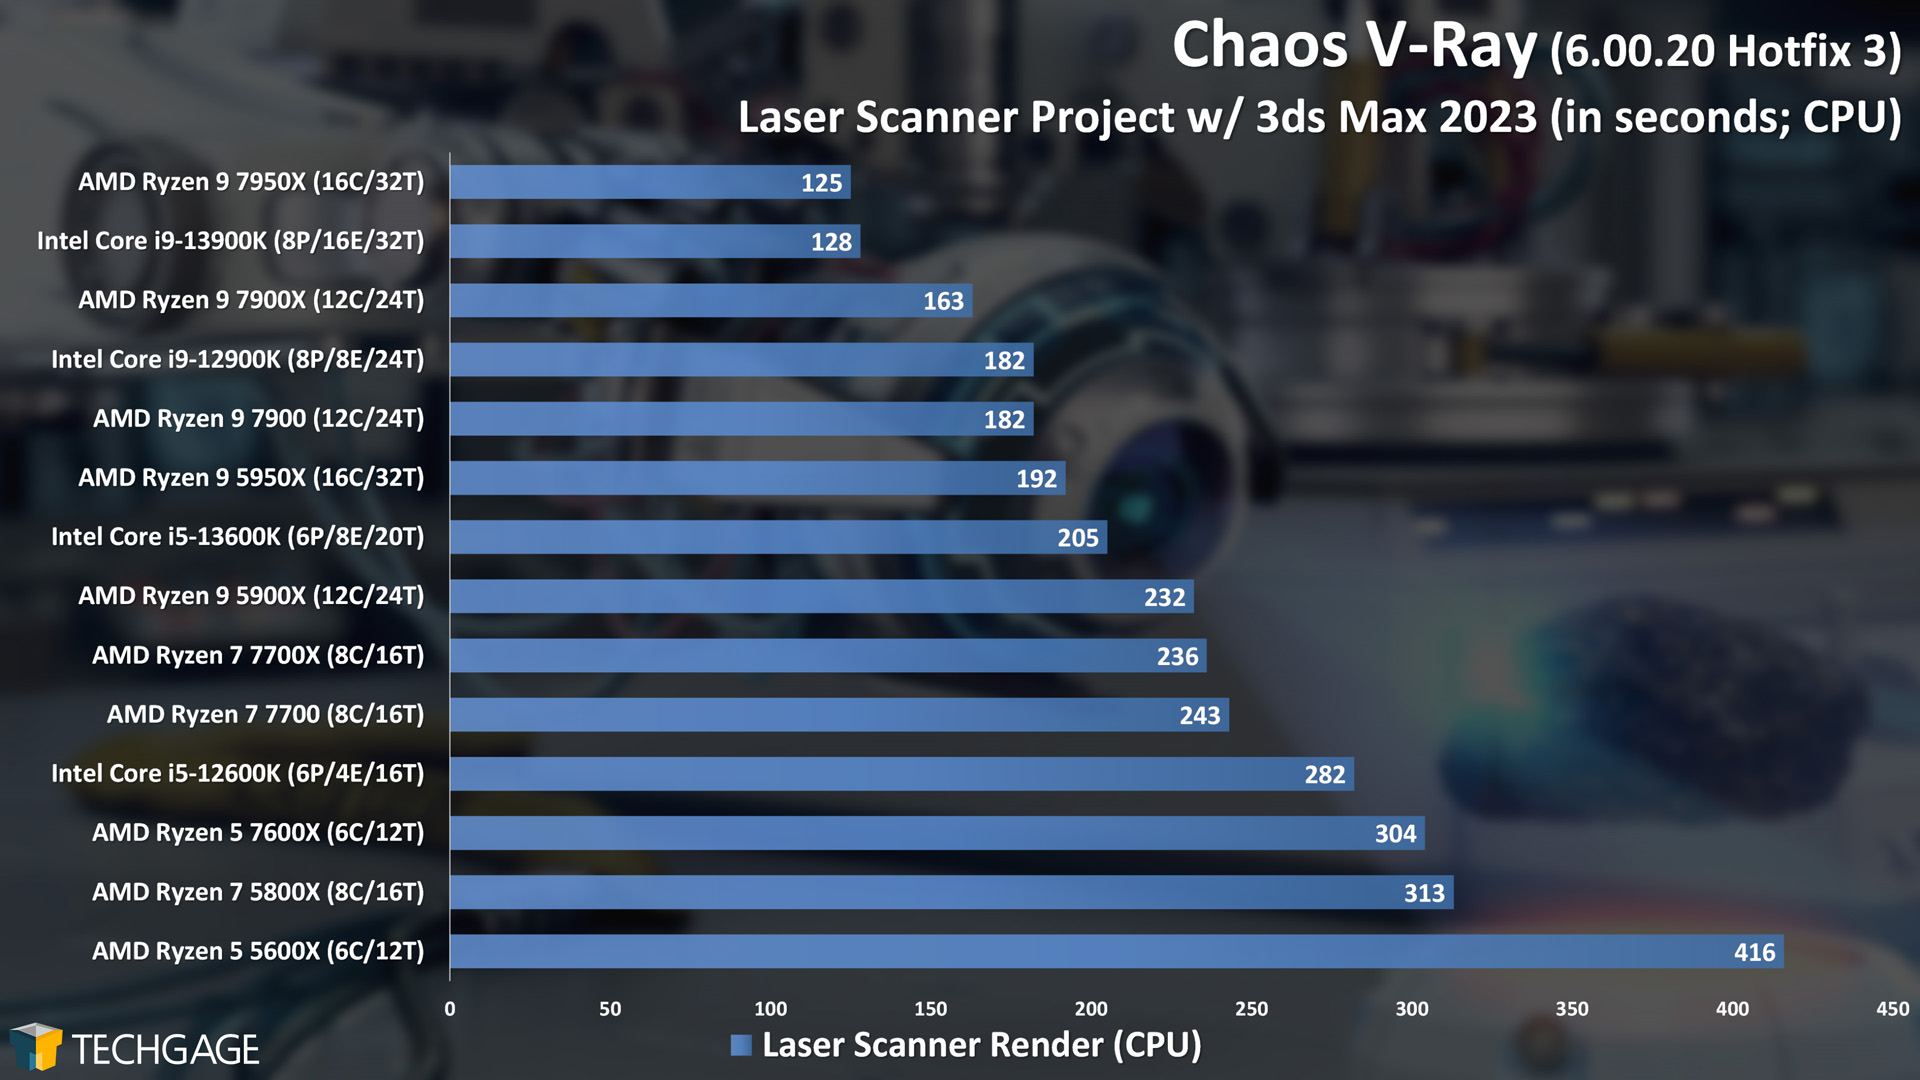 Chaos V-Ray - Laser Scanner CPU Rendering Performance